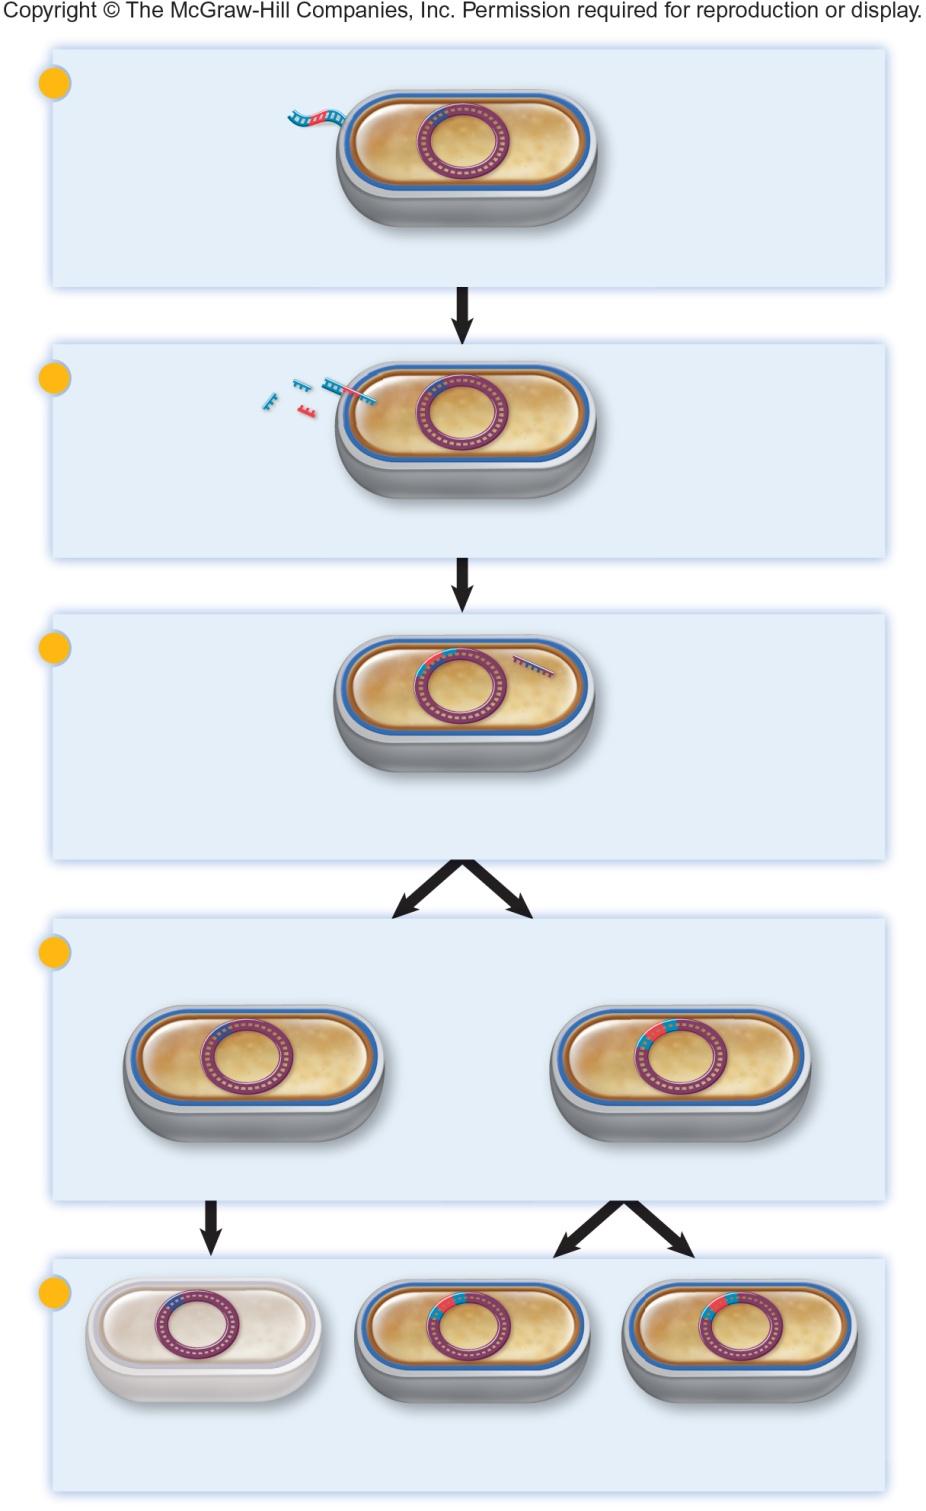 (b) Integrated DN fragment Homologous recombination DN fragment (no origin of replication) DN fragment integrated into a bacterial chromosome can be replicated and passed on to daughter cells.